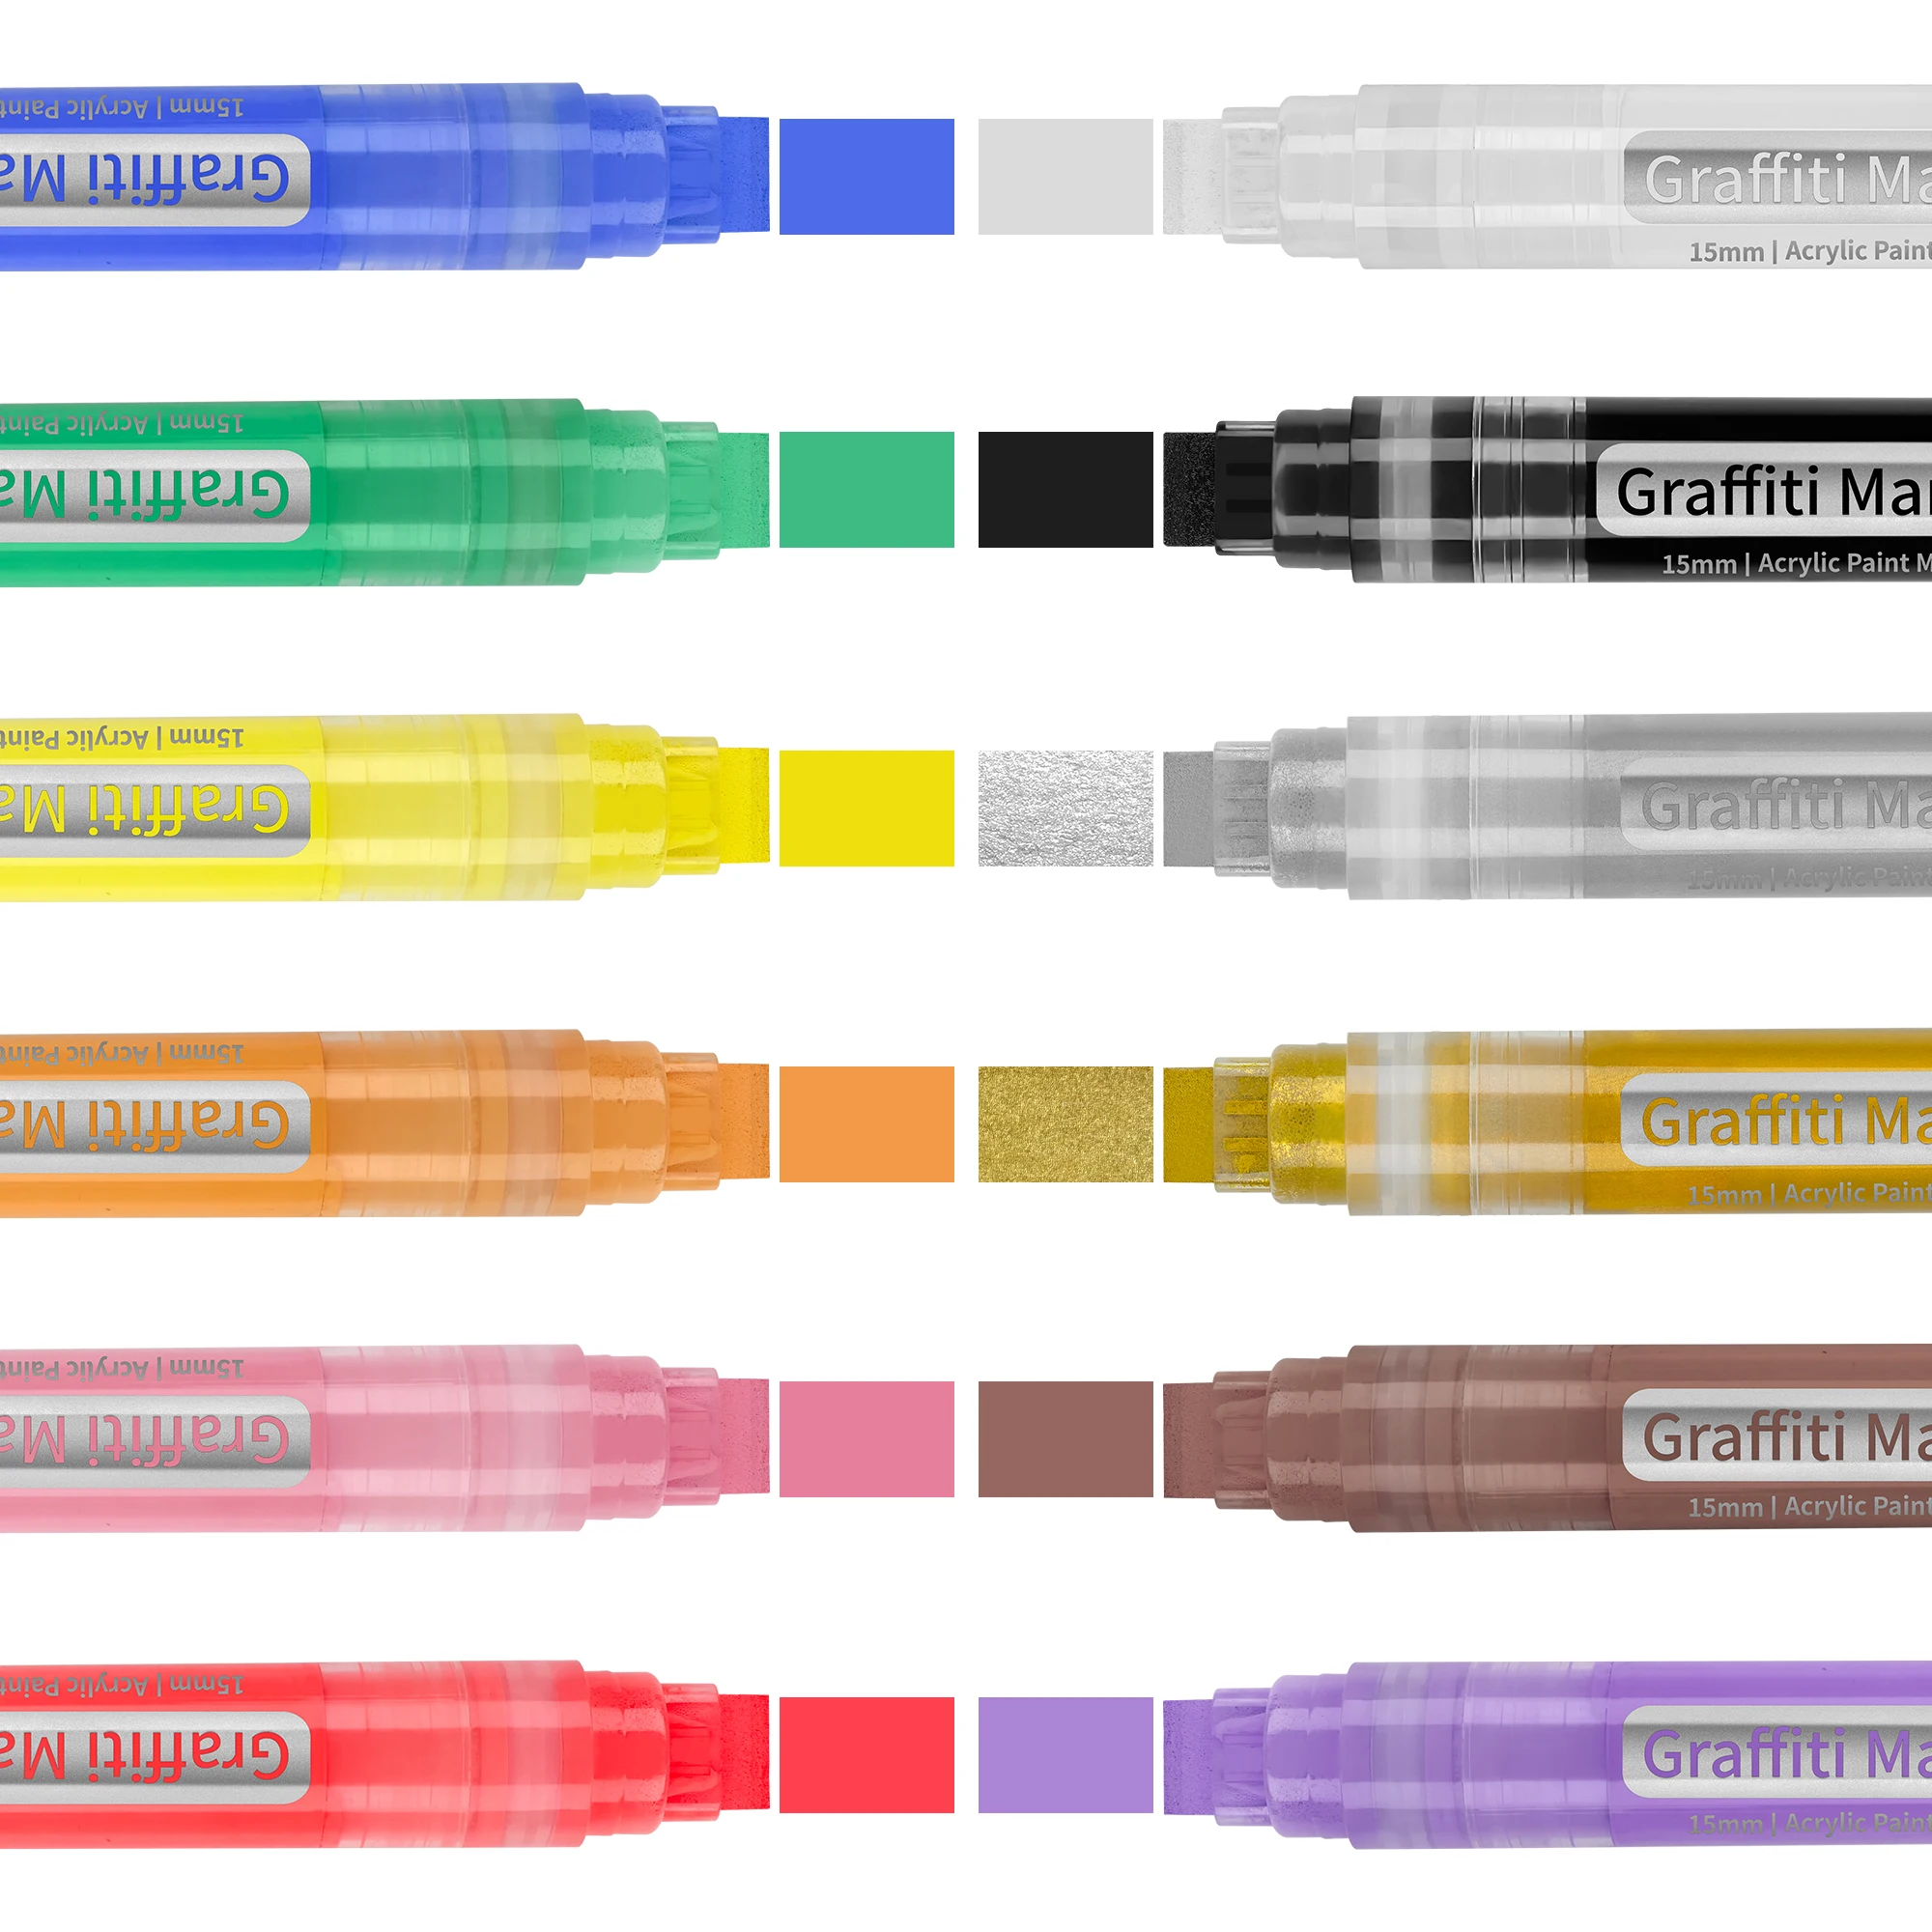 Jumbo size 15mm Felt Tip,Water Based Acrylic,Waterproof and Permanent ink,No Toxic No Odorg,Marker Pen